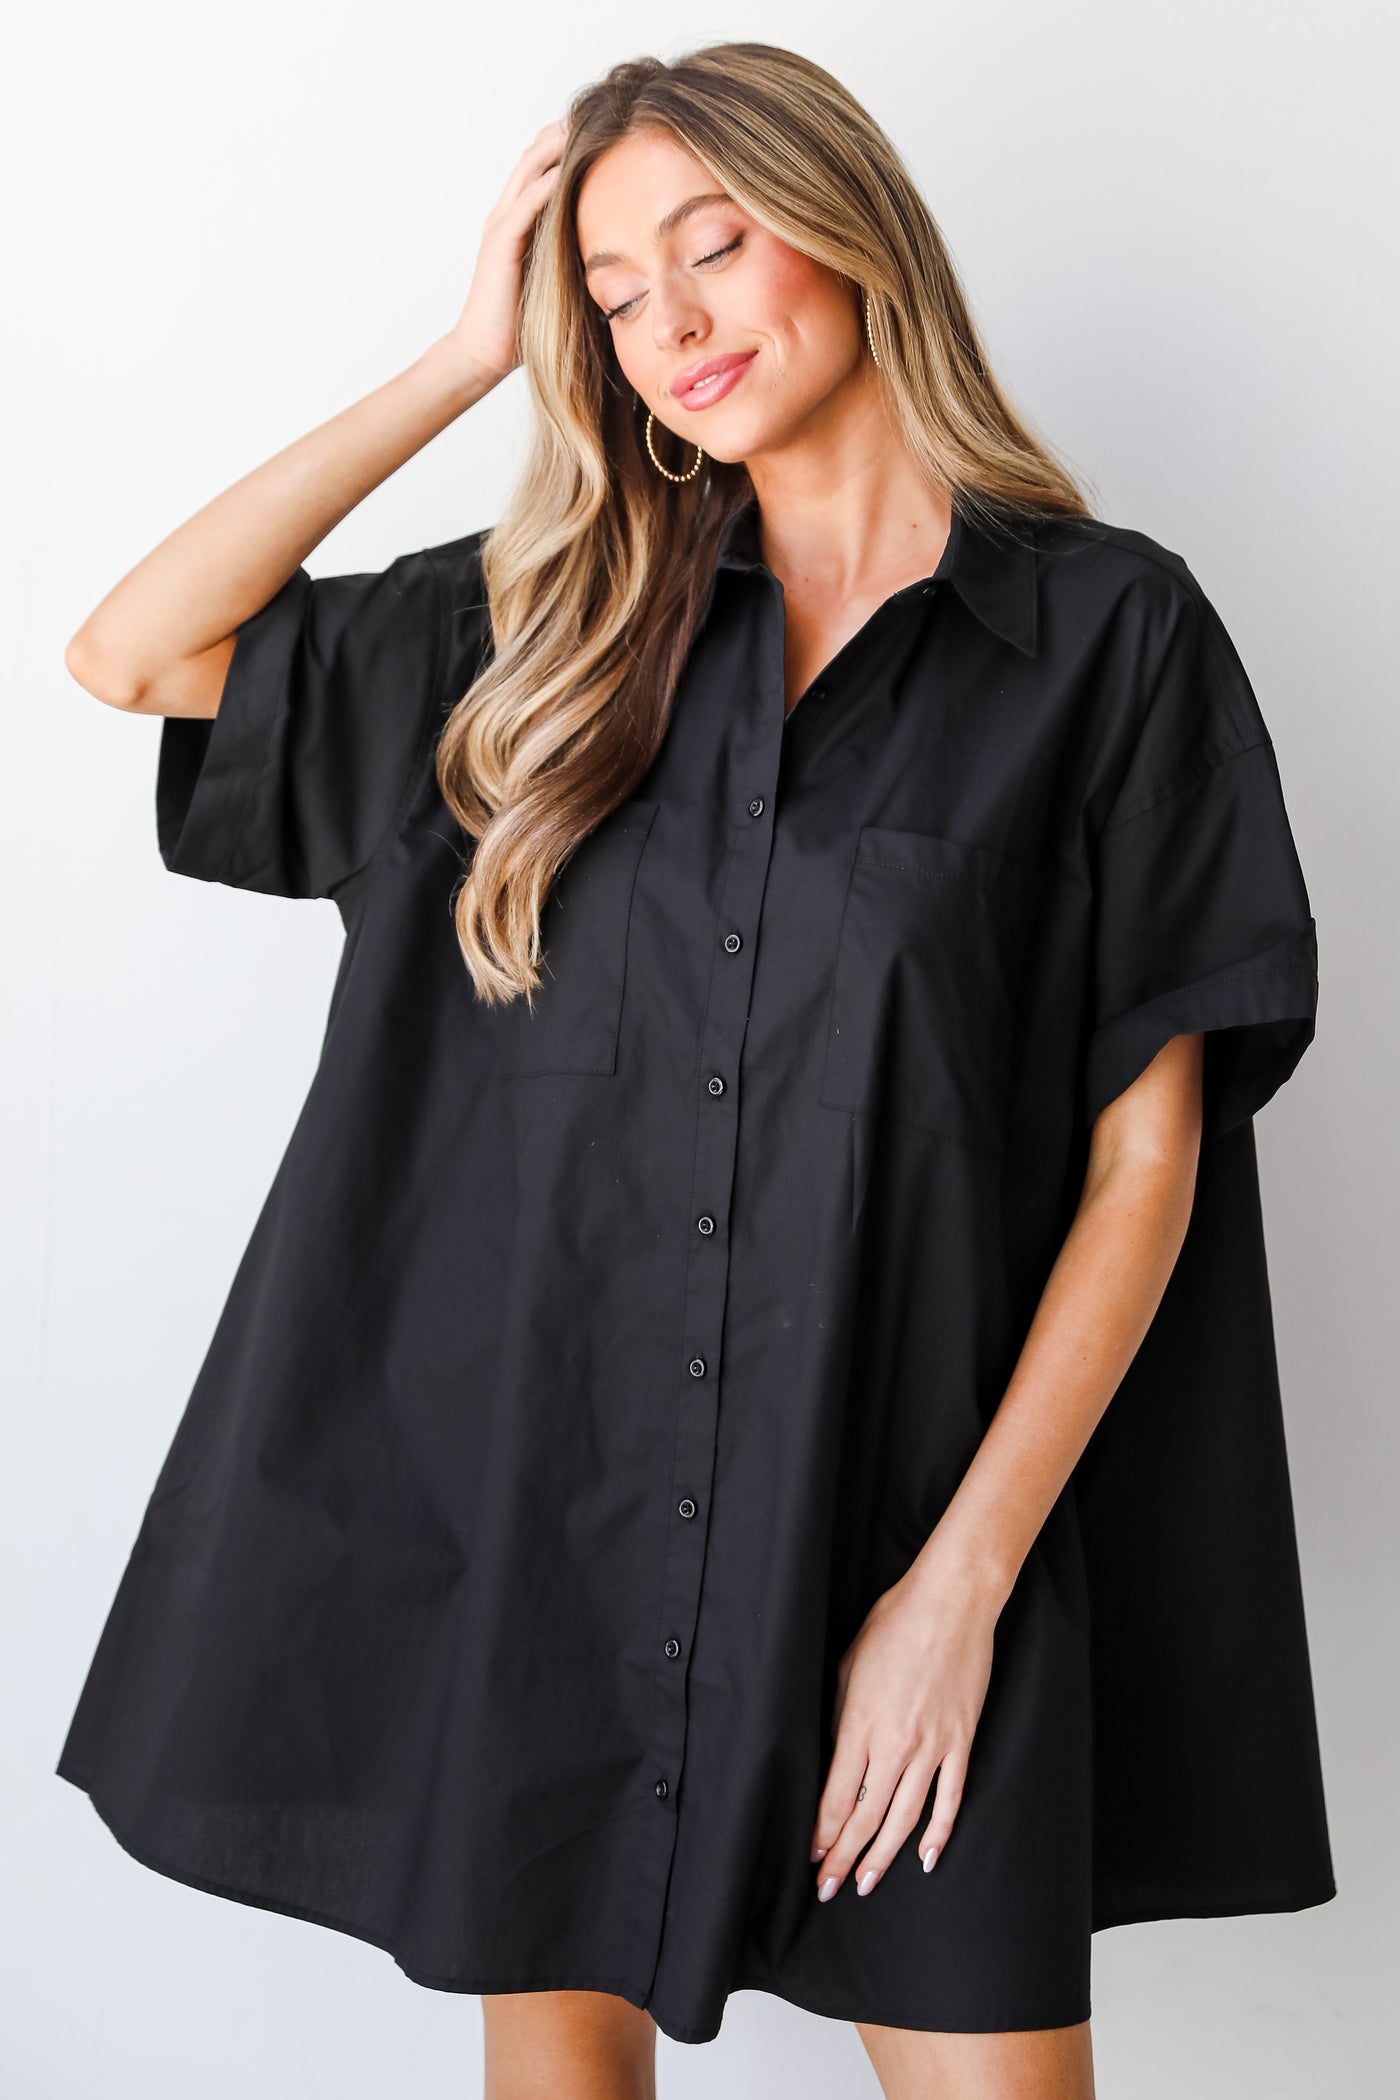 black Shirt Dress on front view